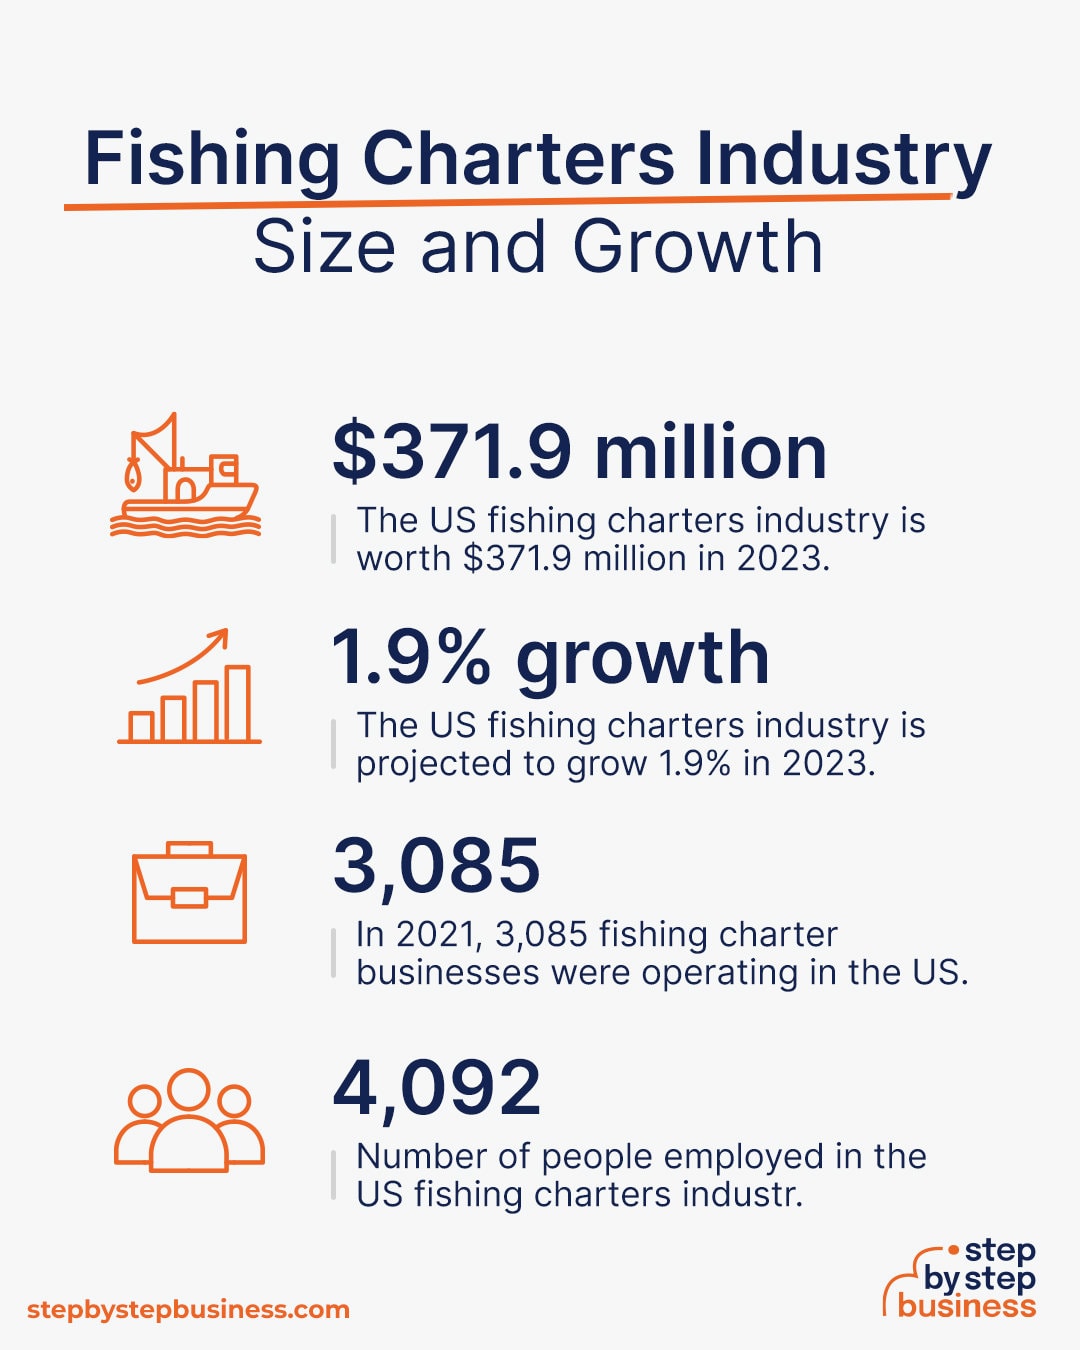 Fishing Charter industry size and growth